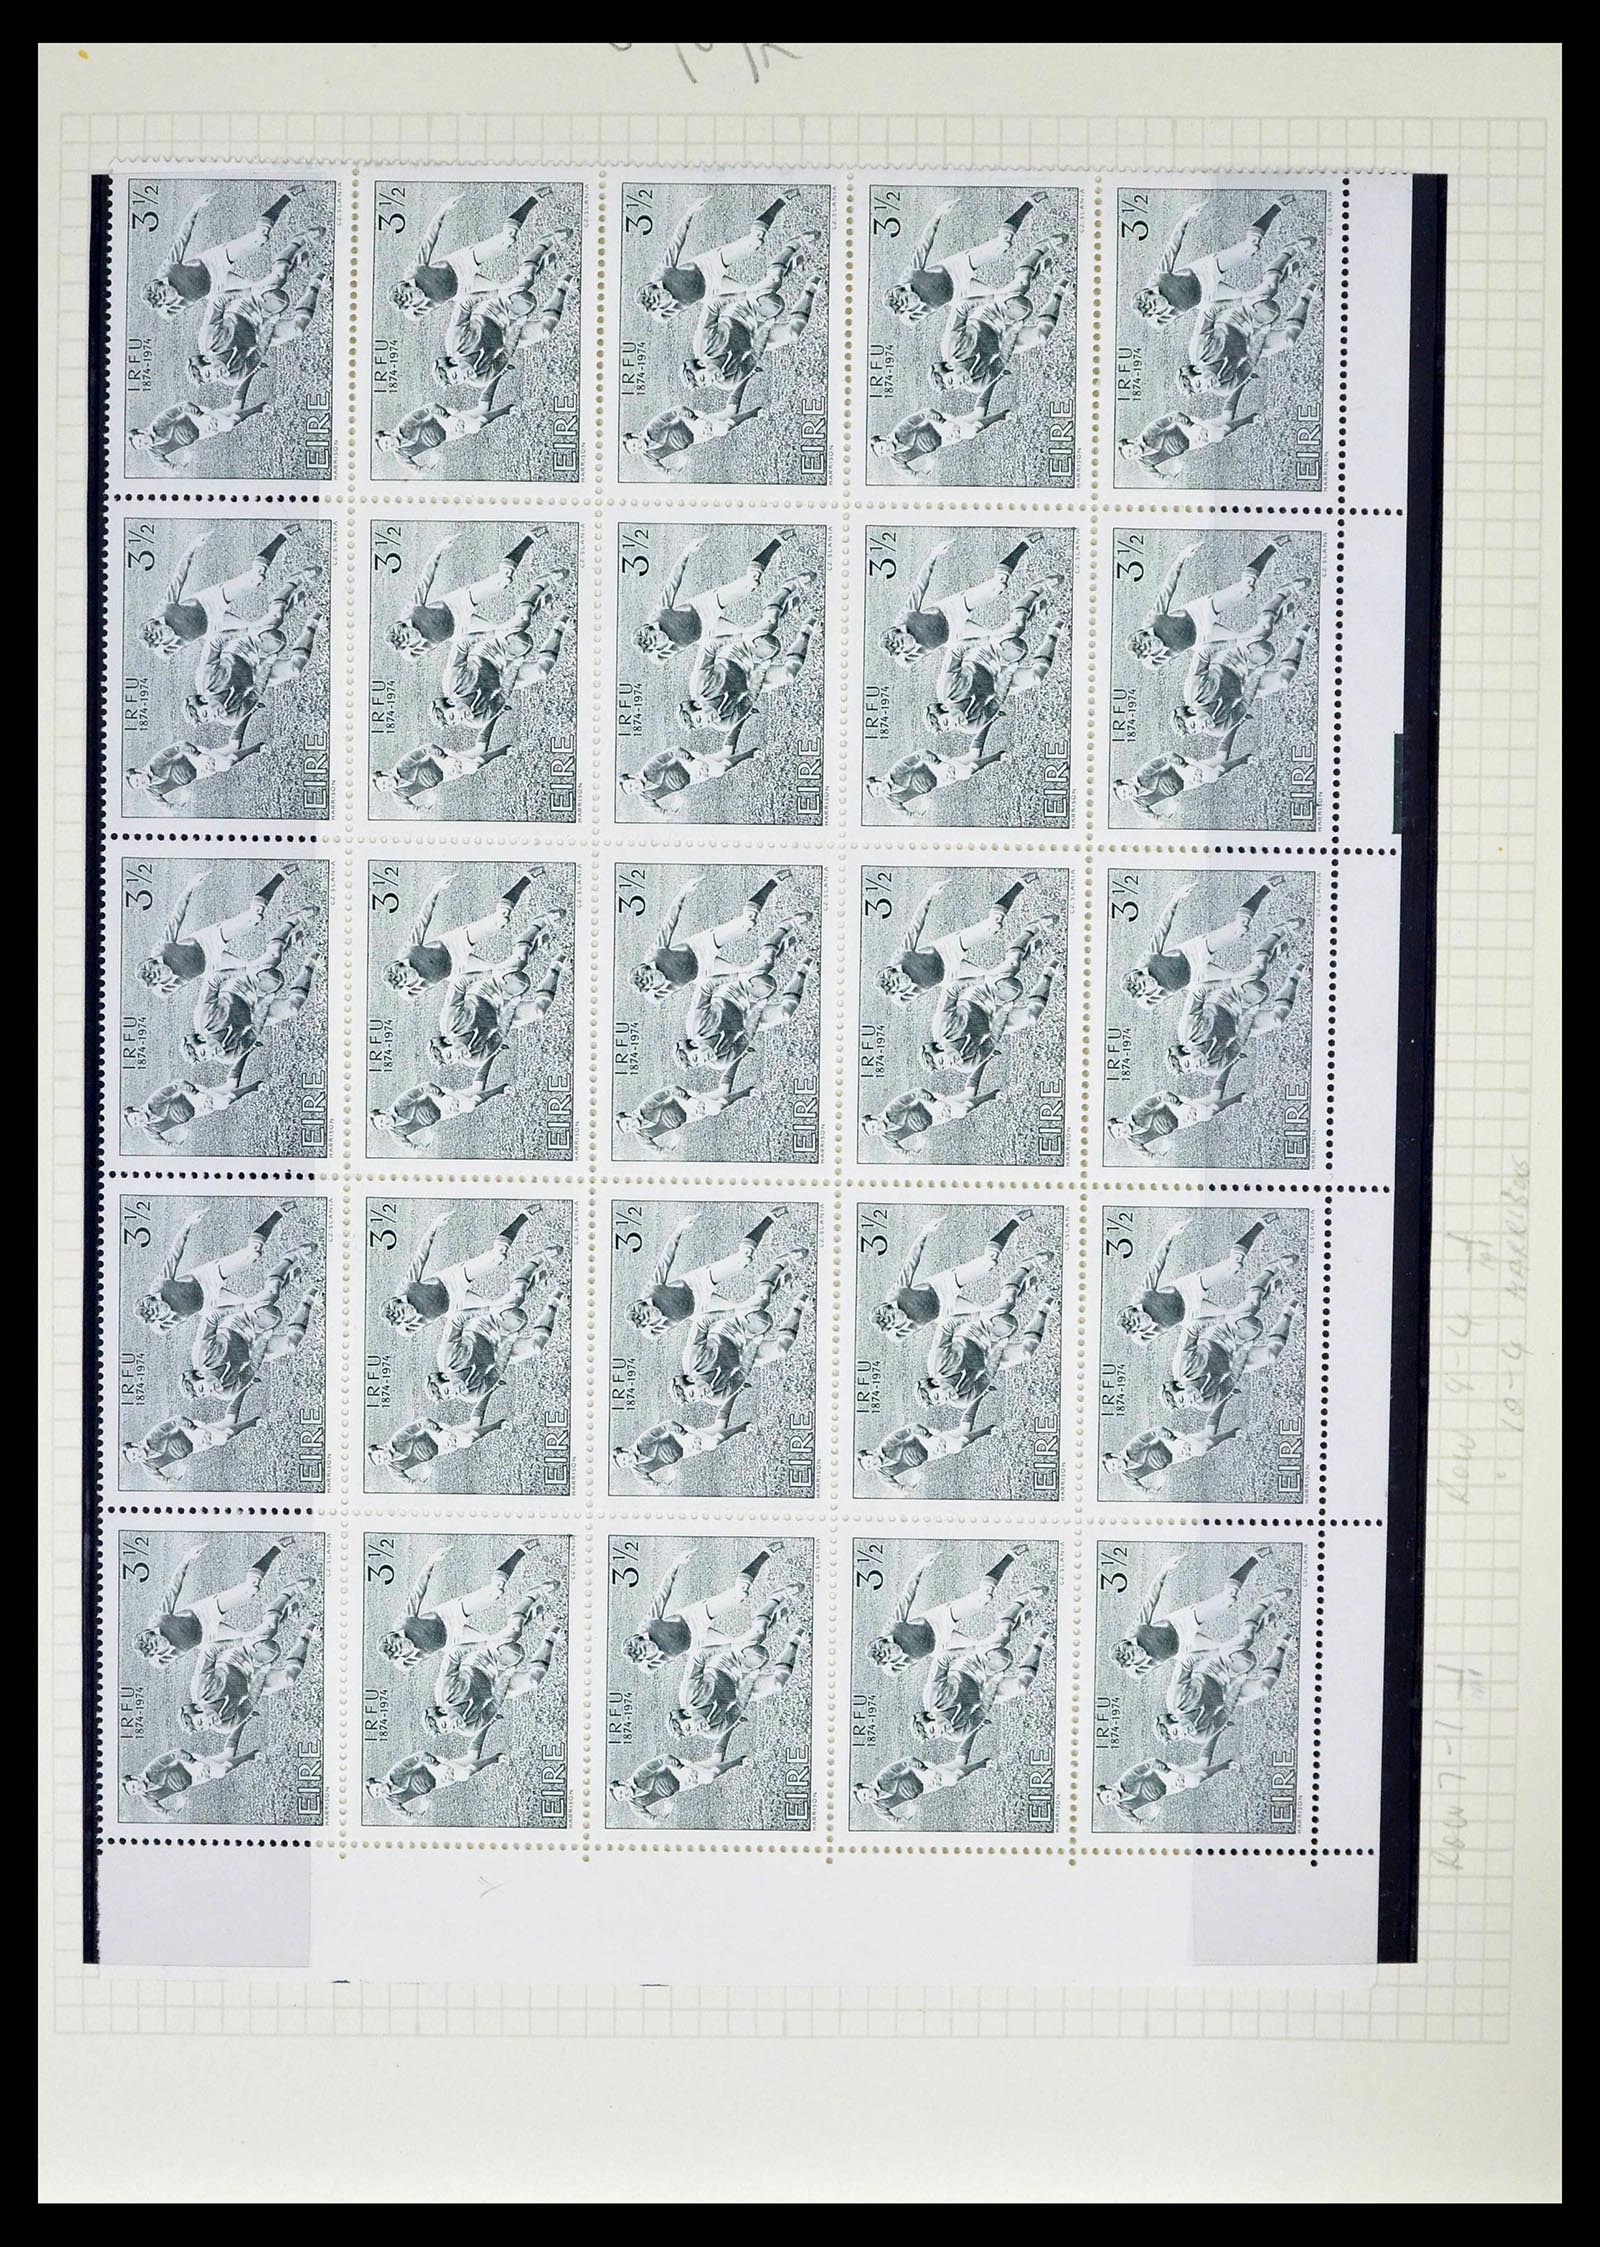 39272 0033 - Stamp collection 39272 Ireland plateflaws and varities 1963-1981.